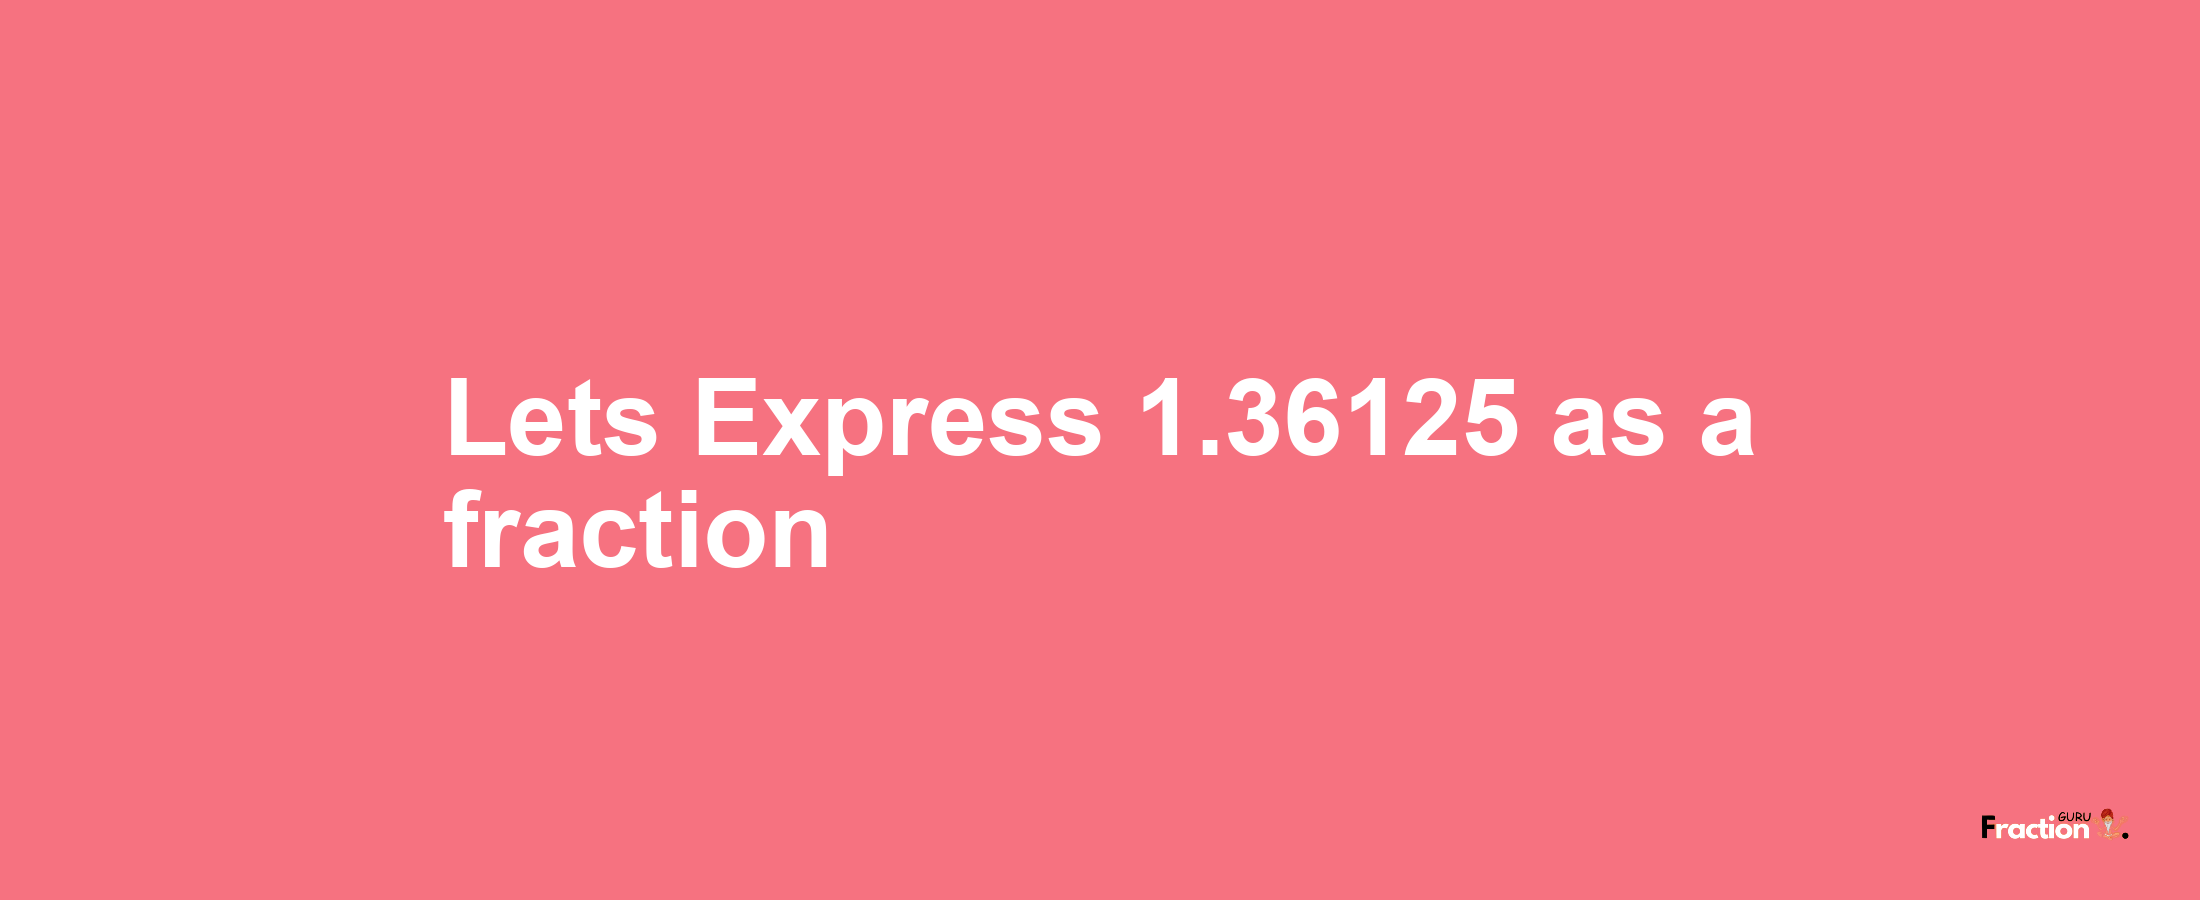 Lets Express 1.36125 as afraction